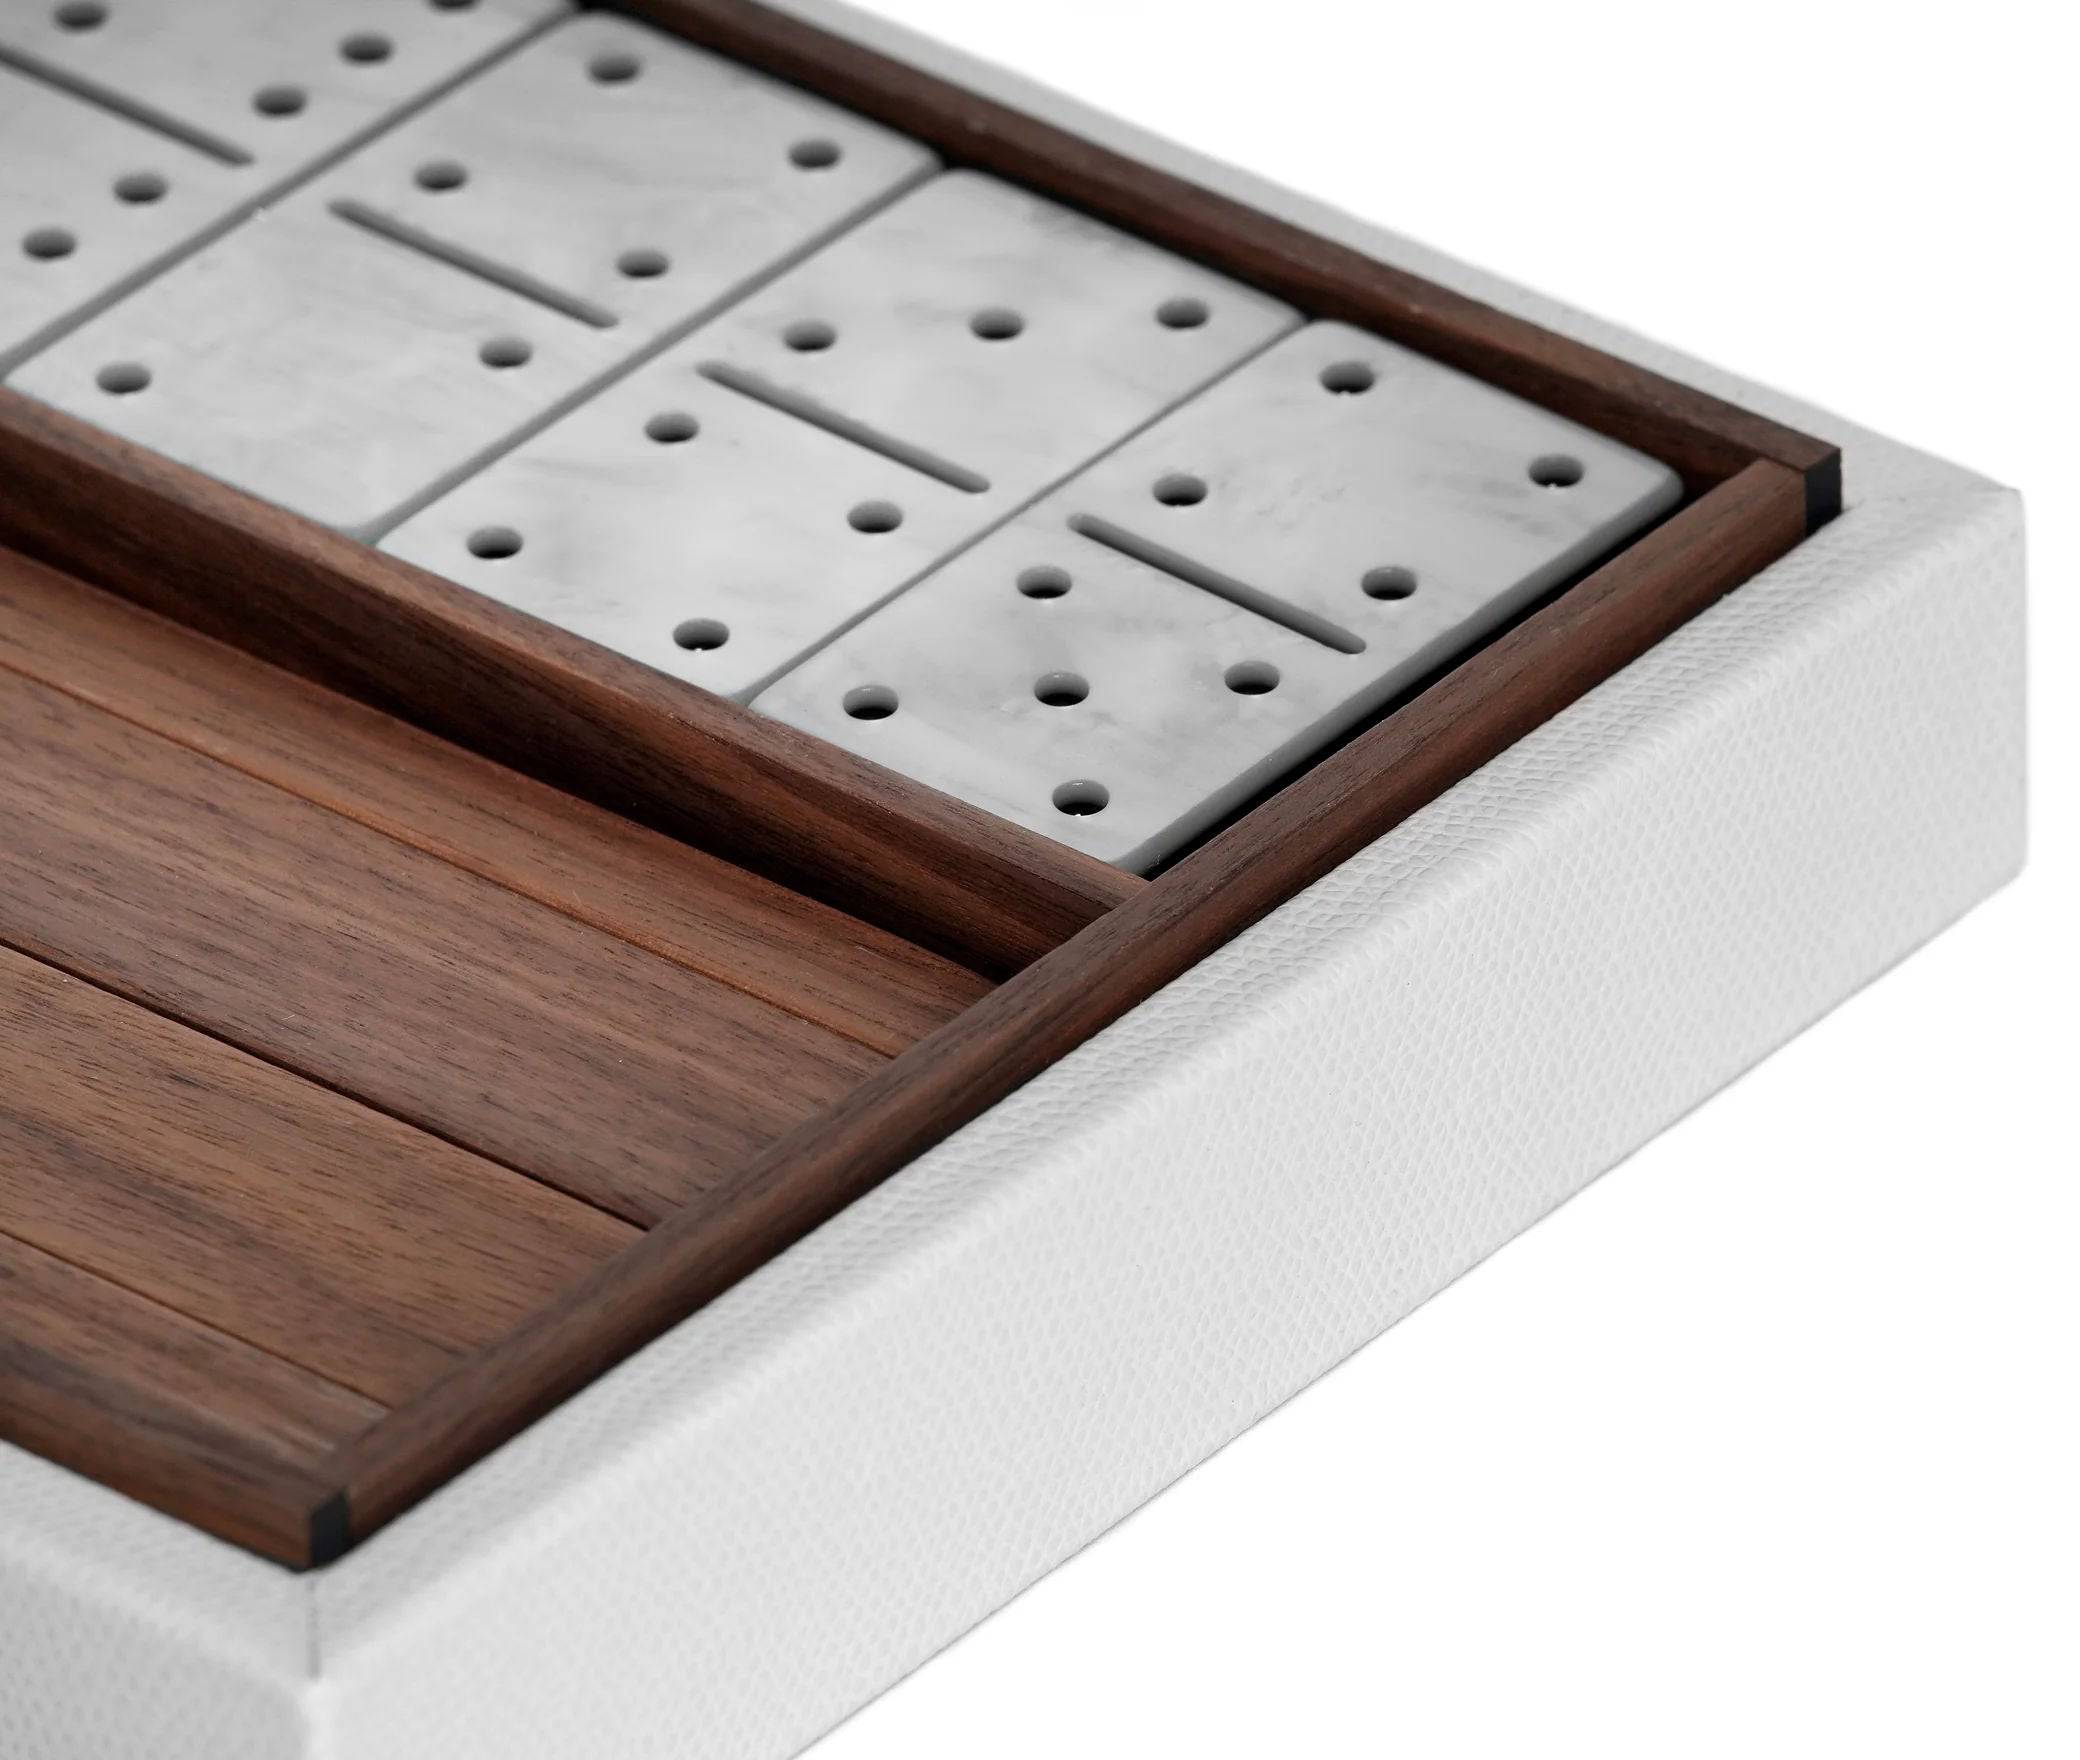 Close-up of a Pinetti luxury domino set in a wooden box, showcasing pieces neatly arranged, with focus on their dot patterns and high-quality craftsmanship against a white background.